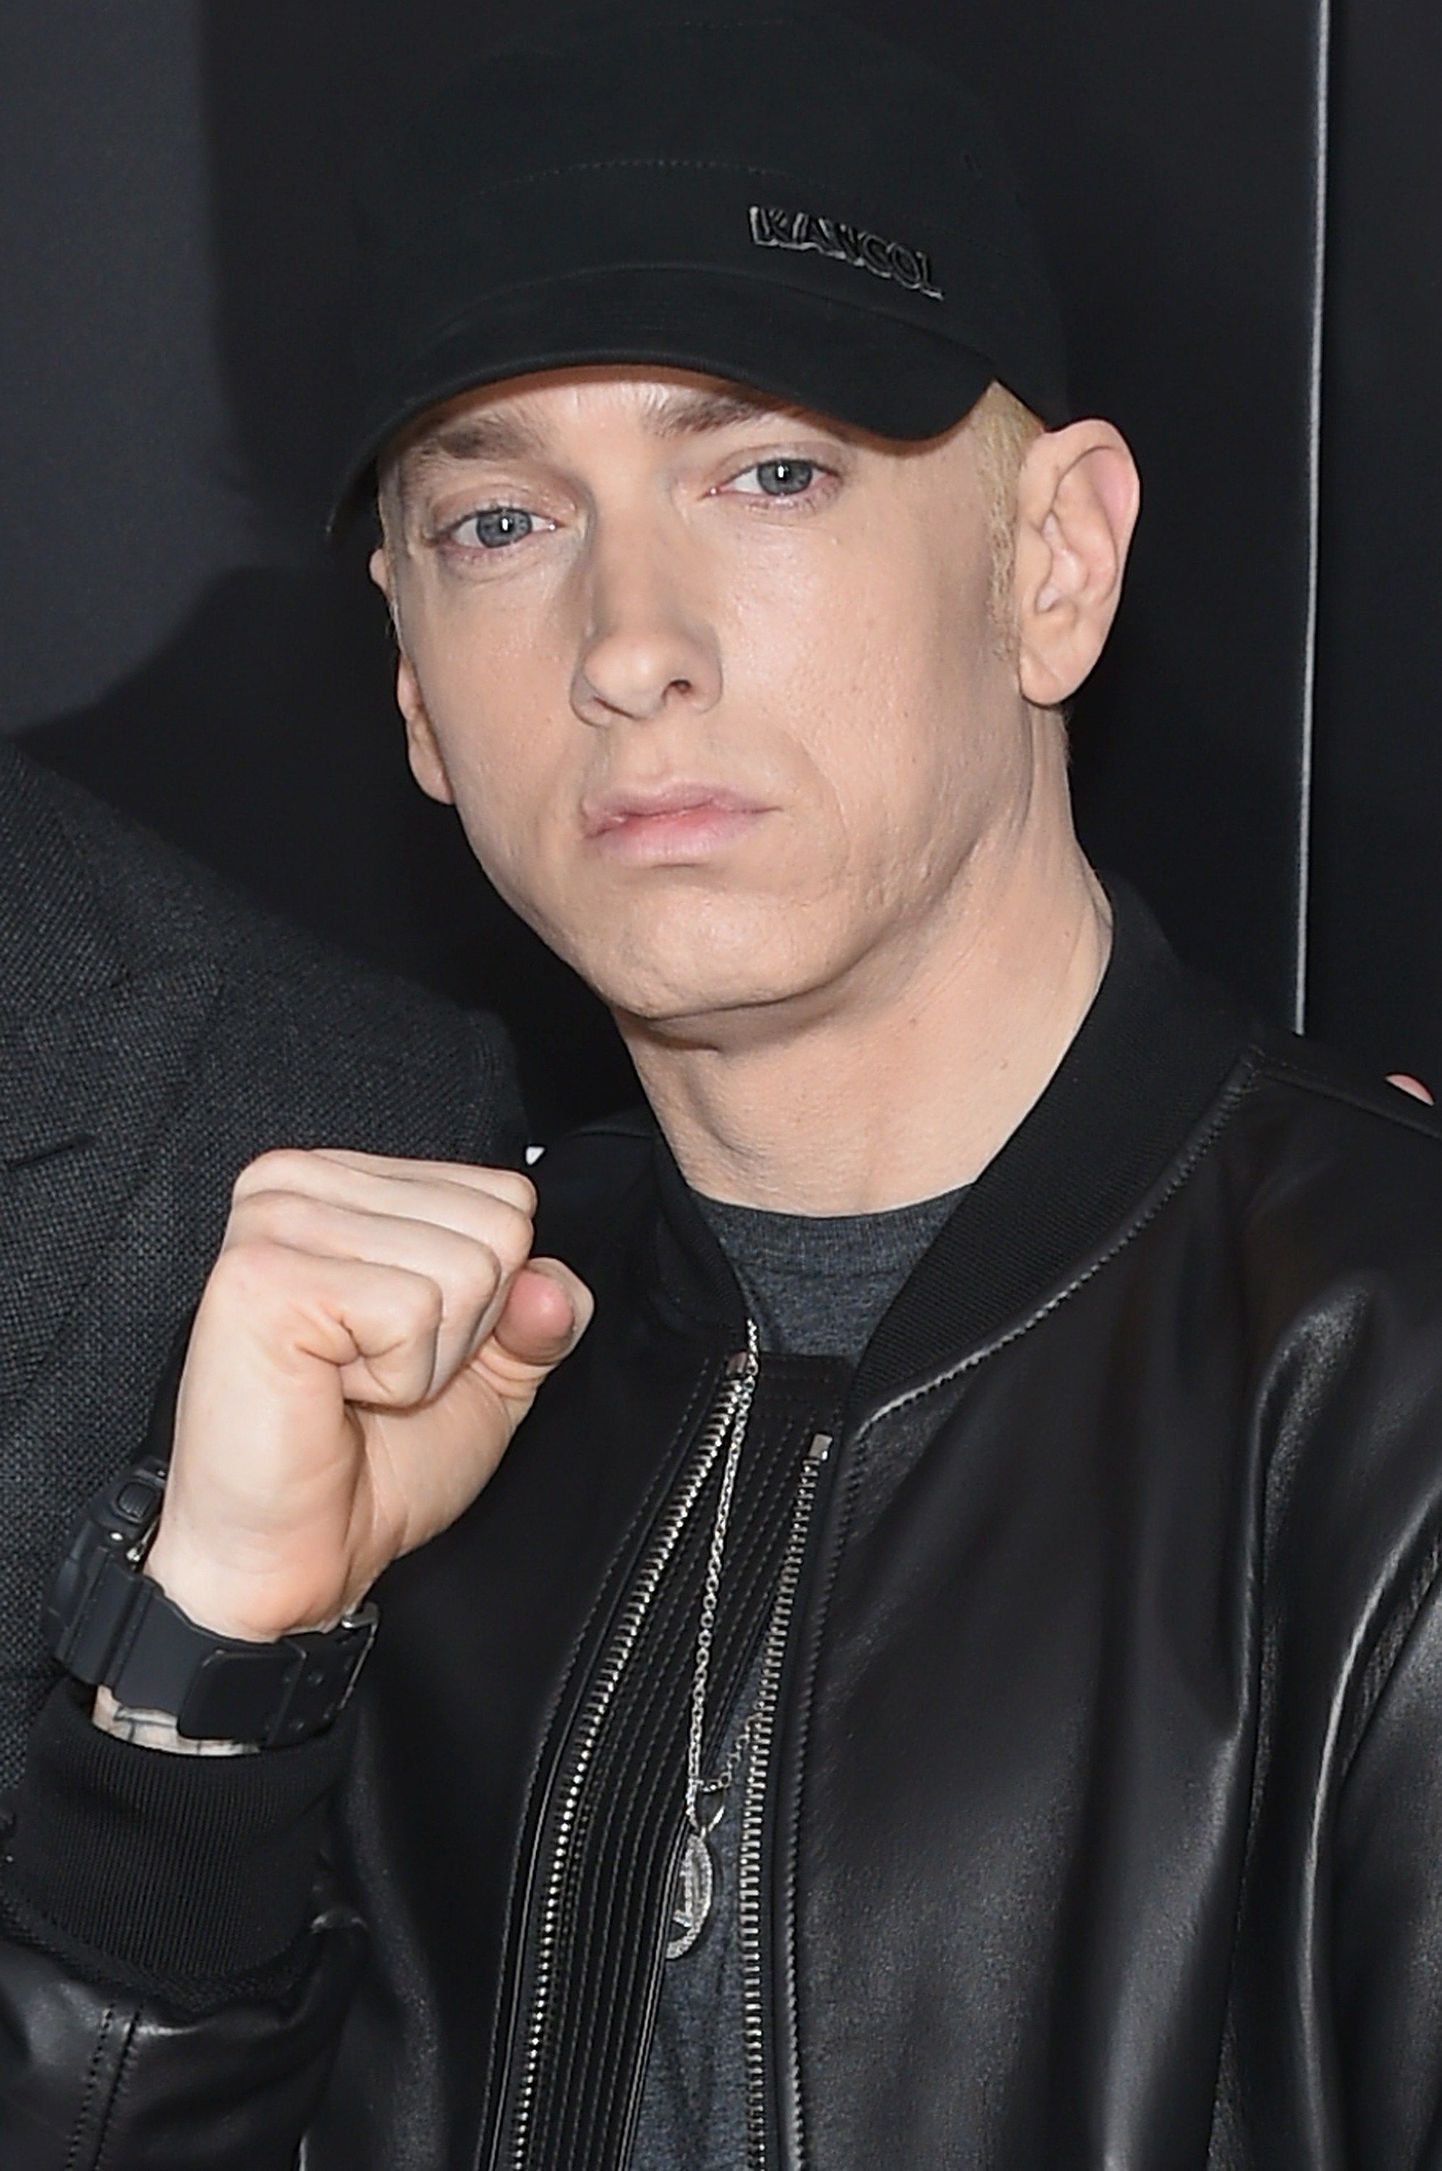 NEW YORK, NY - JULY 20: Eminem attends the 'Southpaw' New York Premiere at AMC Loews Lincoln Square on July 20, 2015 in New York City.   Dimitrios Kambouris/Getty Images/AFP
== FOR NEWSPAPERS, INTERNET, TELCOS & TELEVISION USE ONLY ==